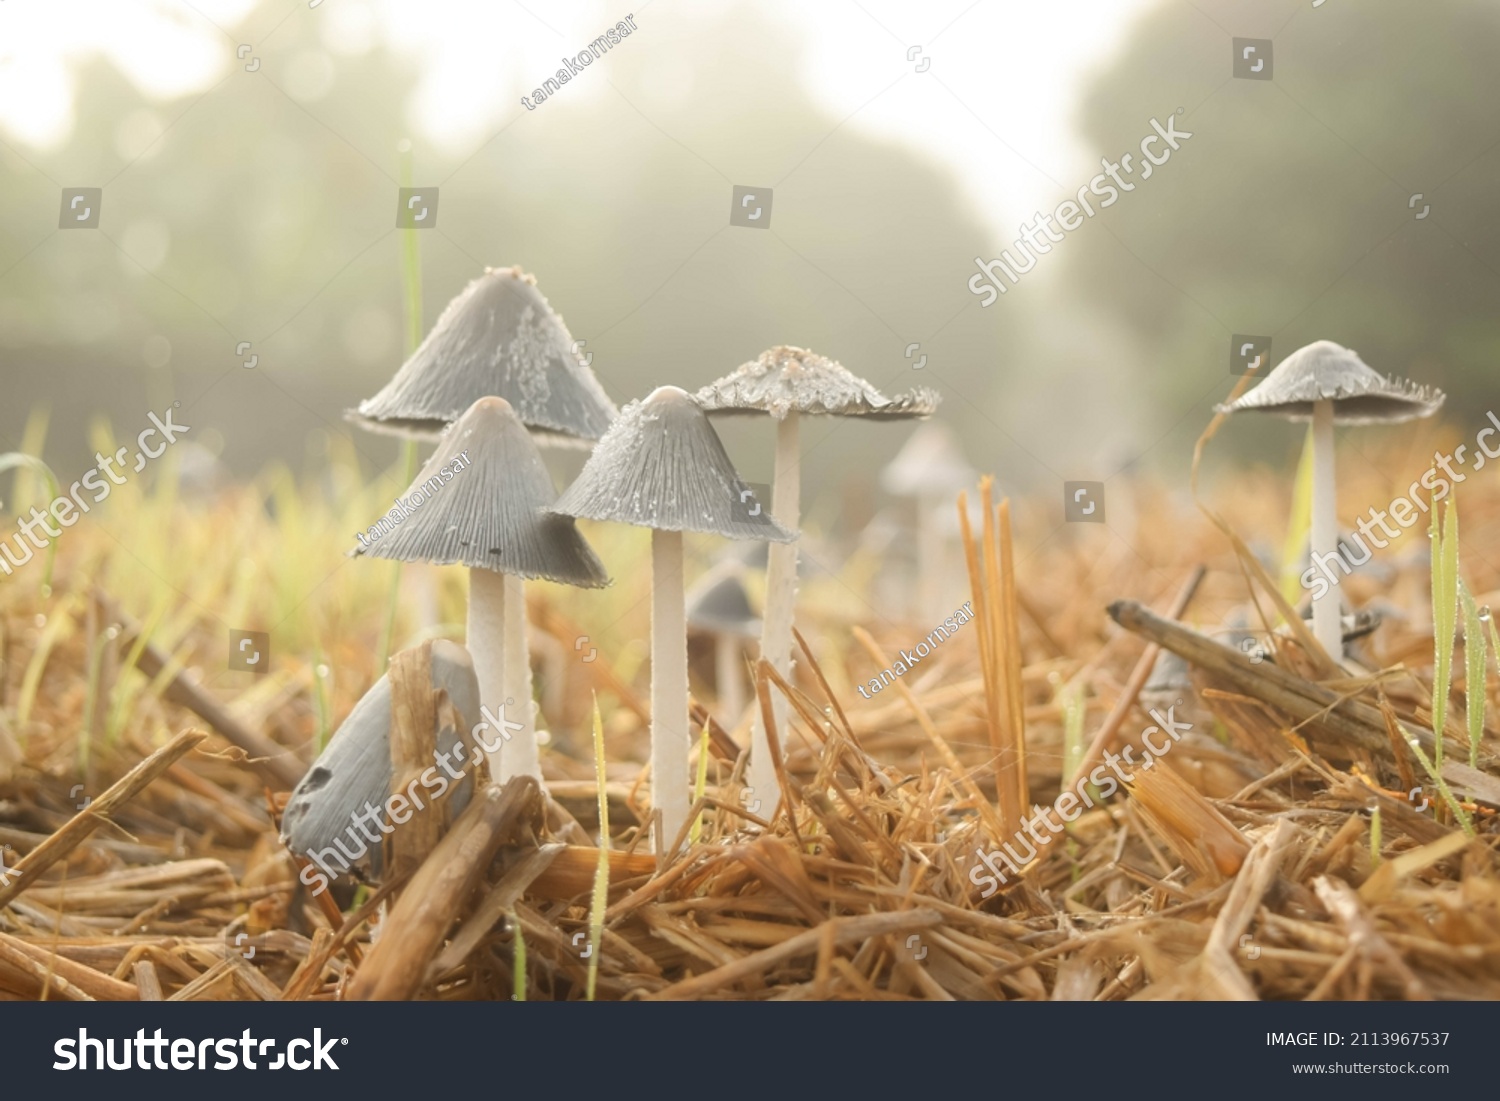 close up many small mushroom toadstools growth on paddy straw ground, tiny world of nature, microorganisms and fungi environment, decompose cycle concept #2113967537